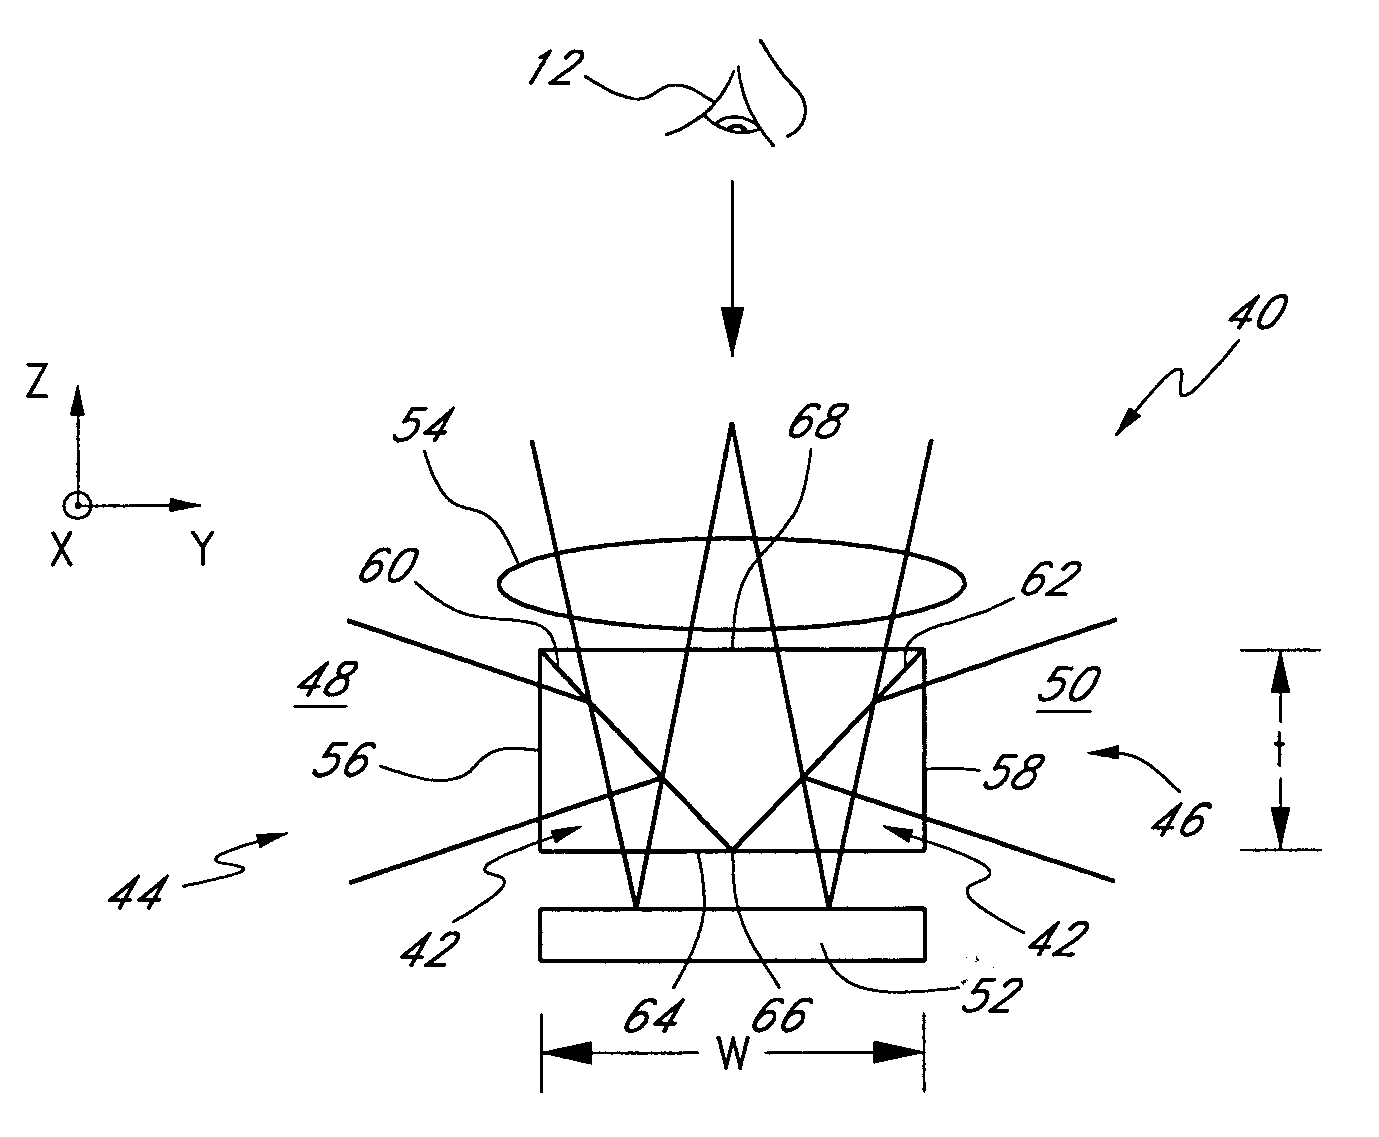 Apparatus and methods for illuminating optical systems